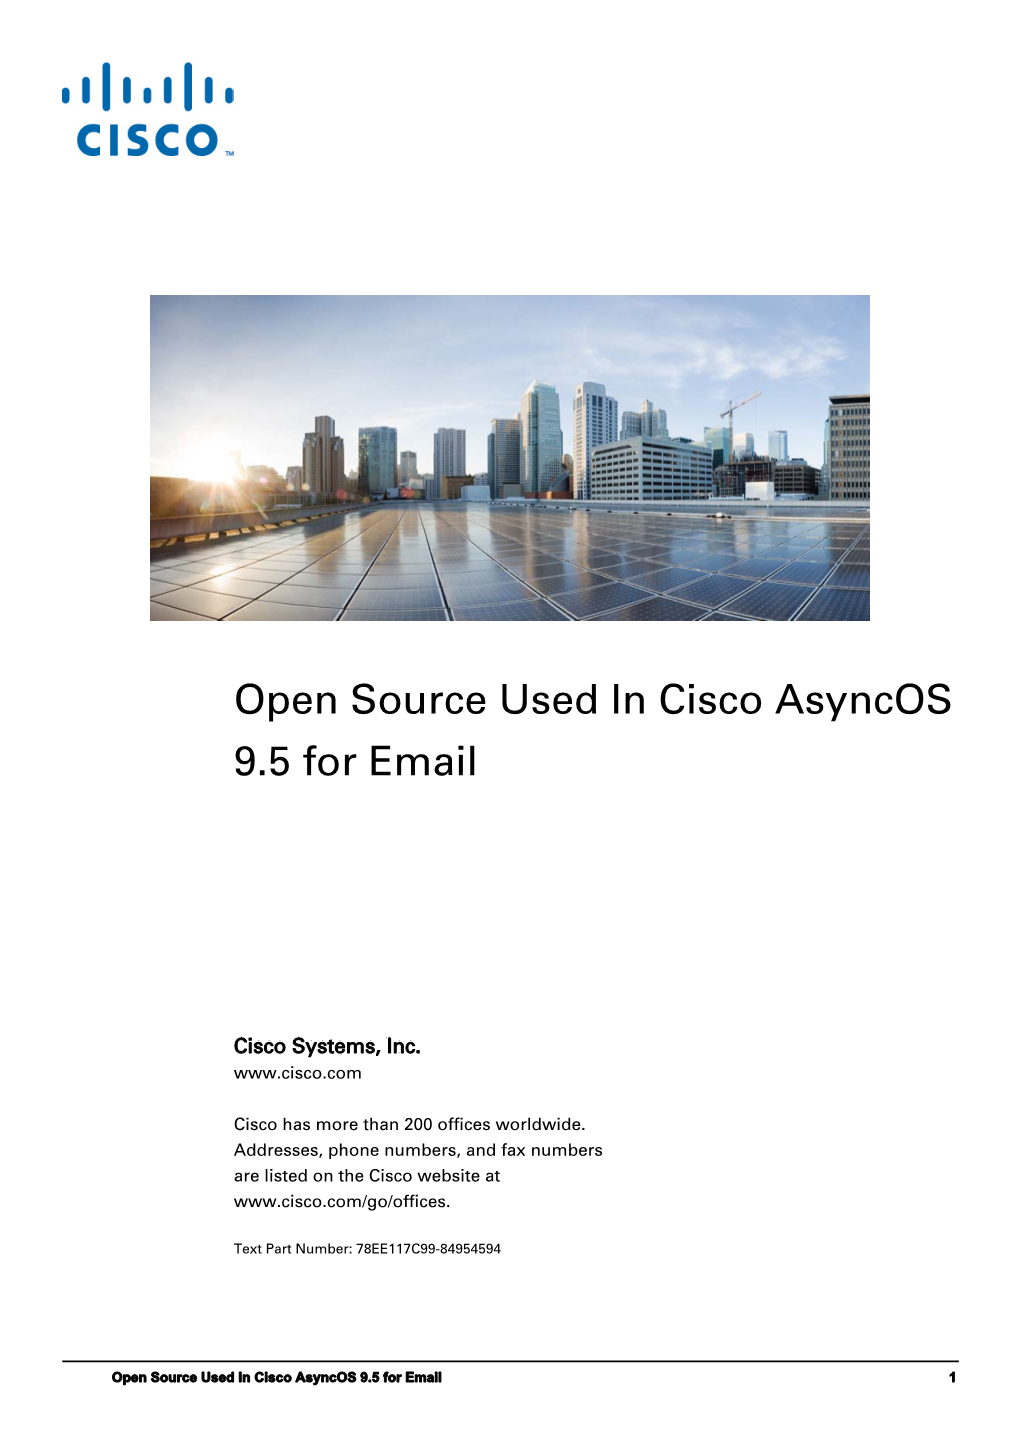 Open Source Used in Asyncos 9.5 for Email